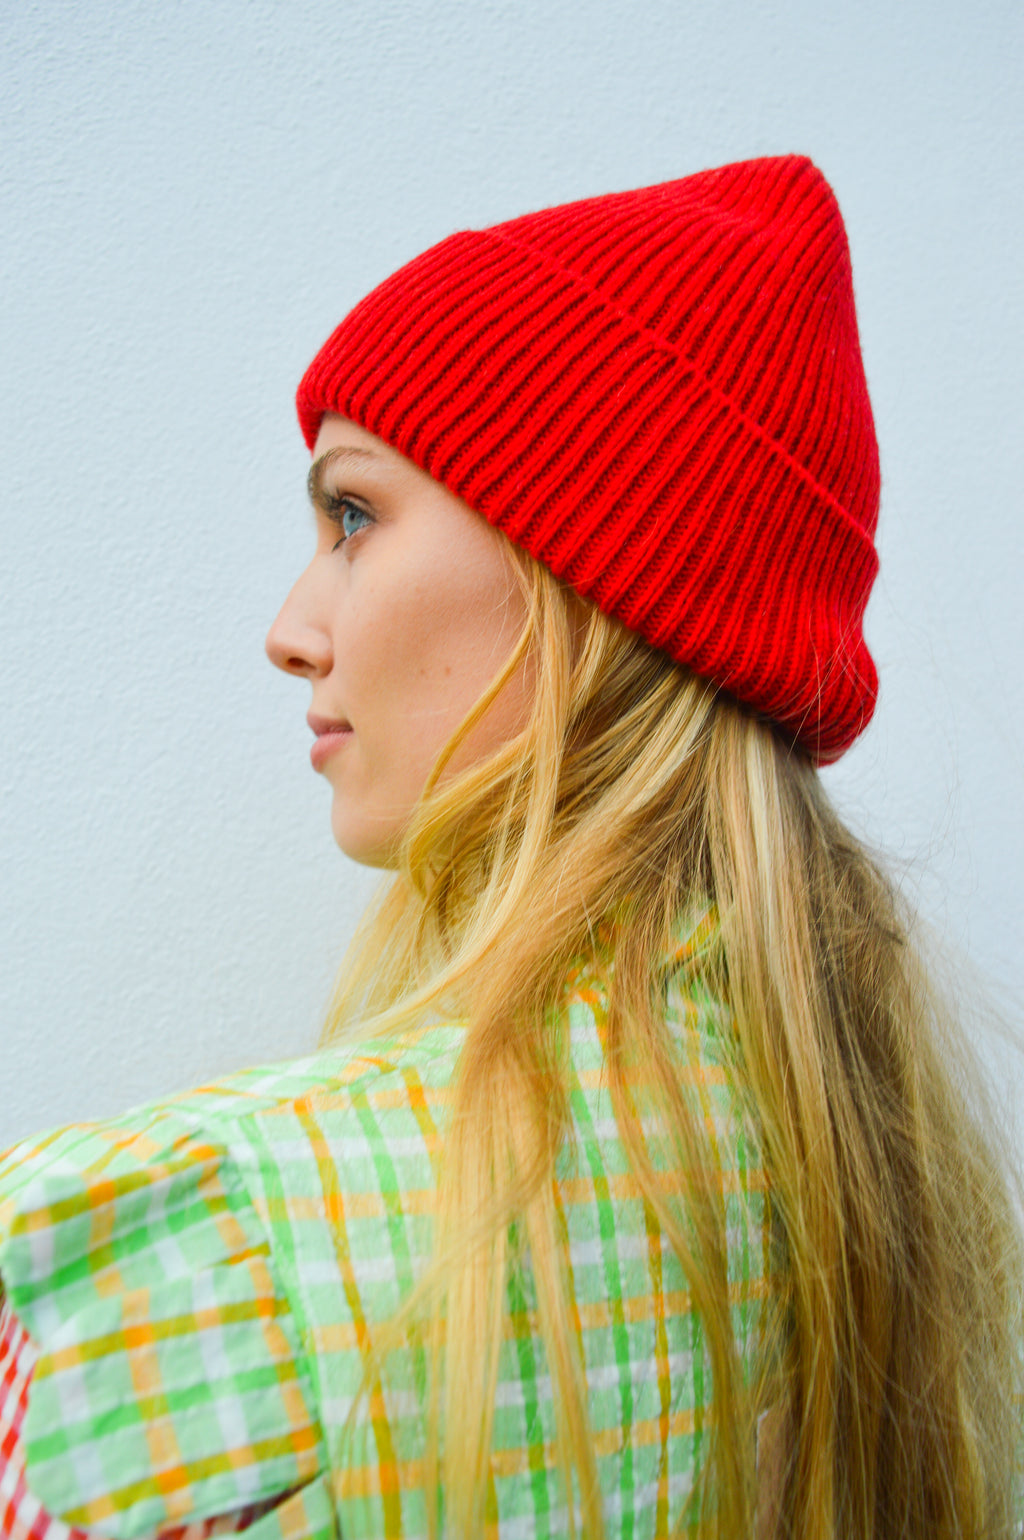 Colorful Standard Scarlet Red Hat - The Mercantile London